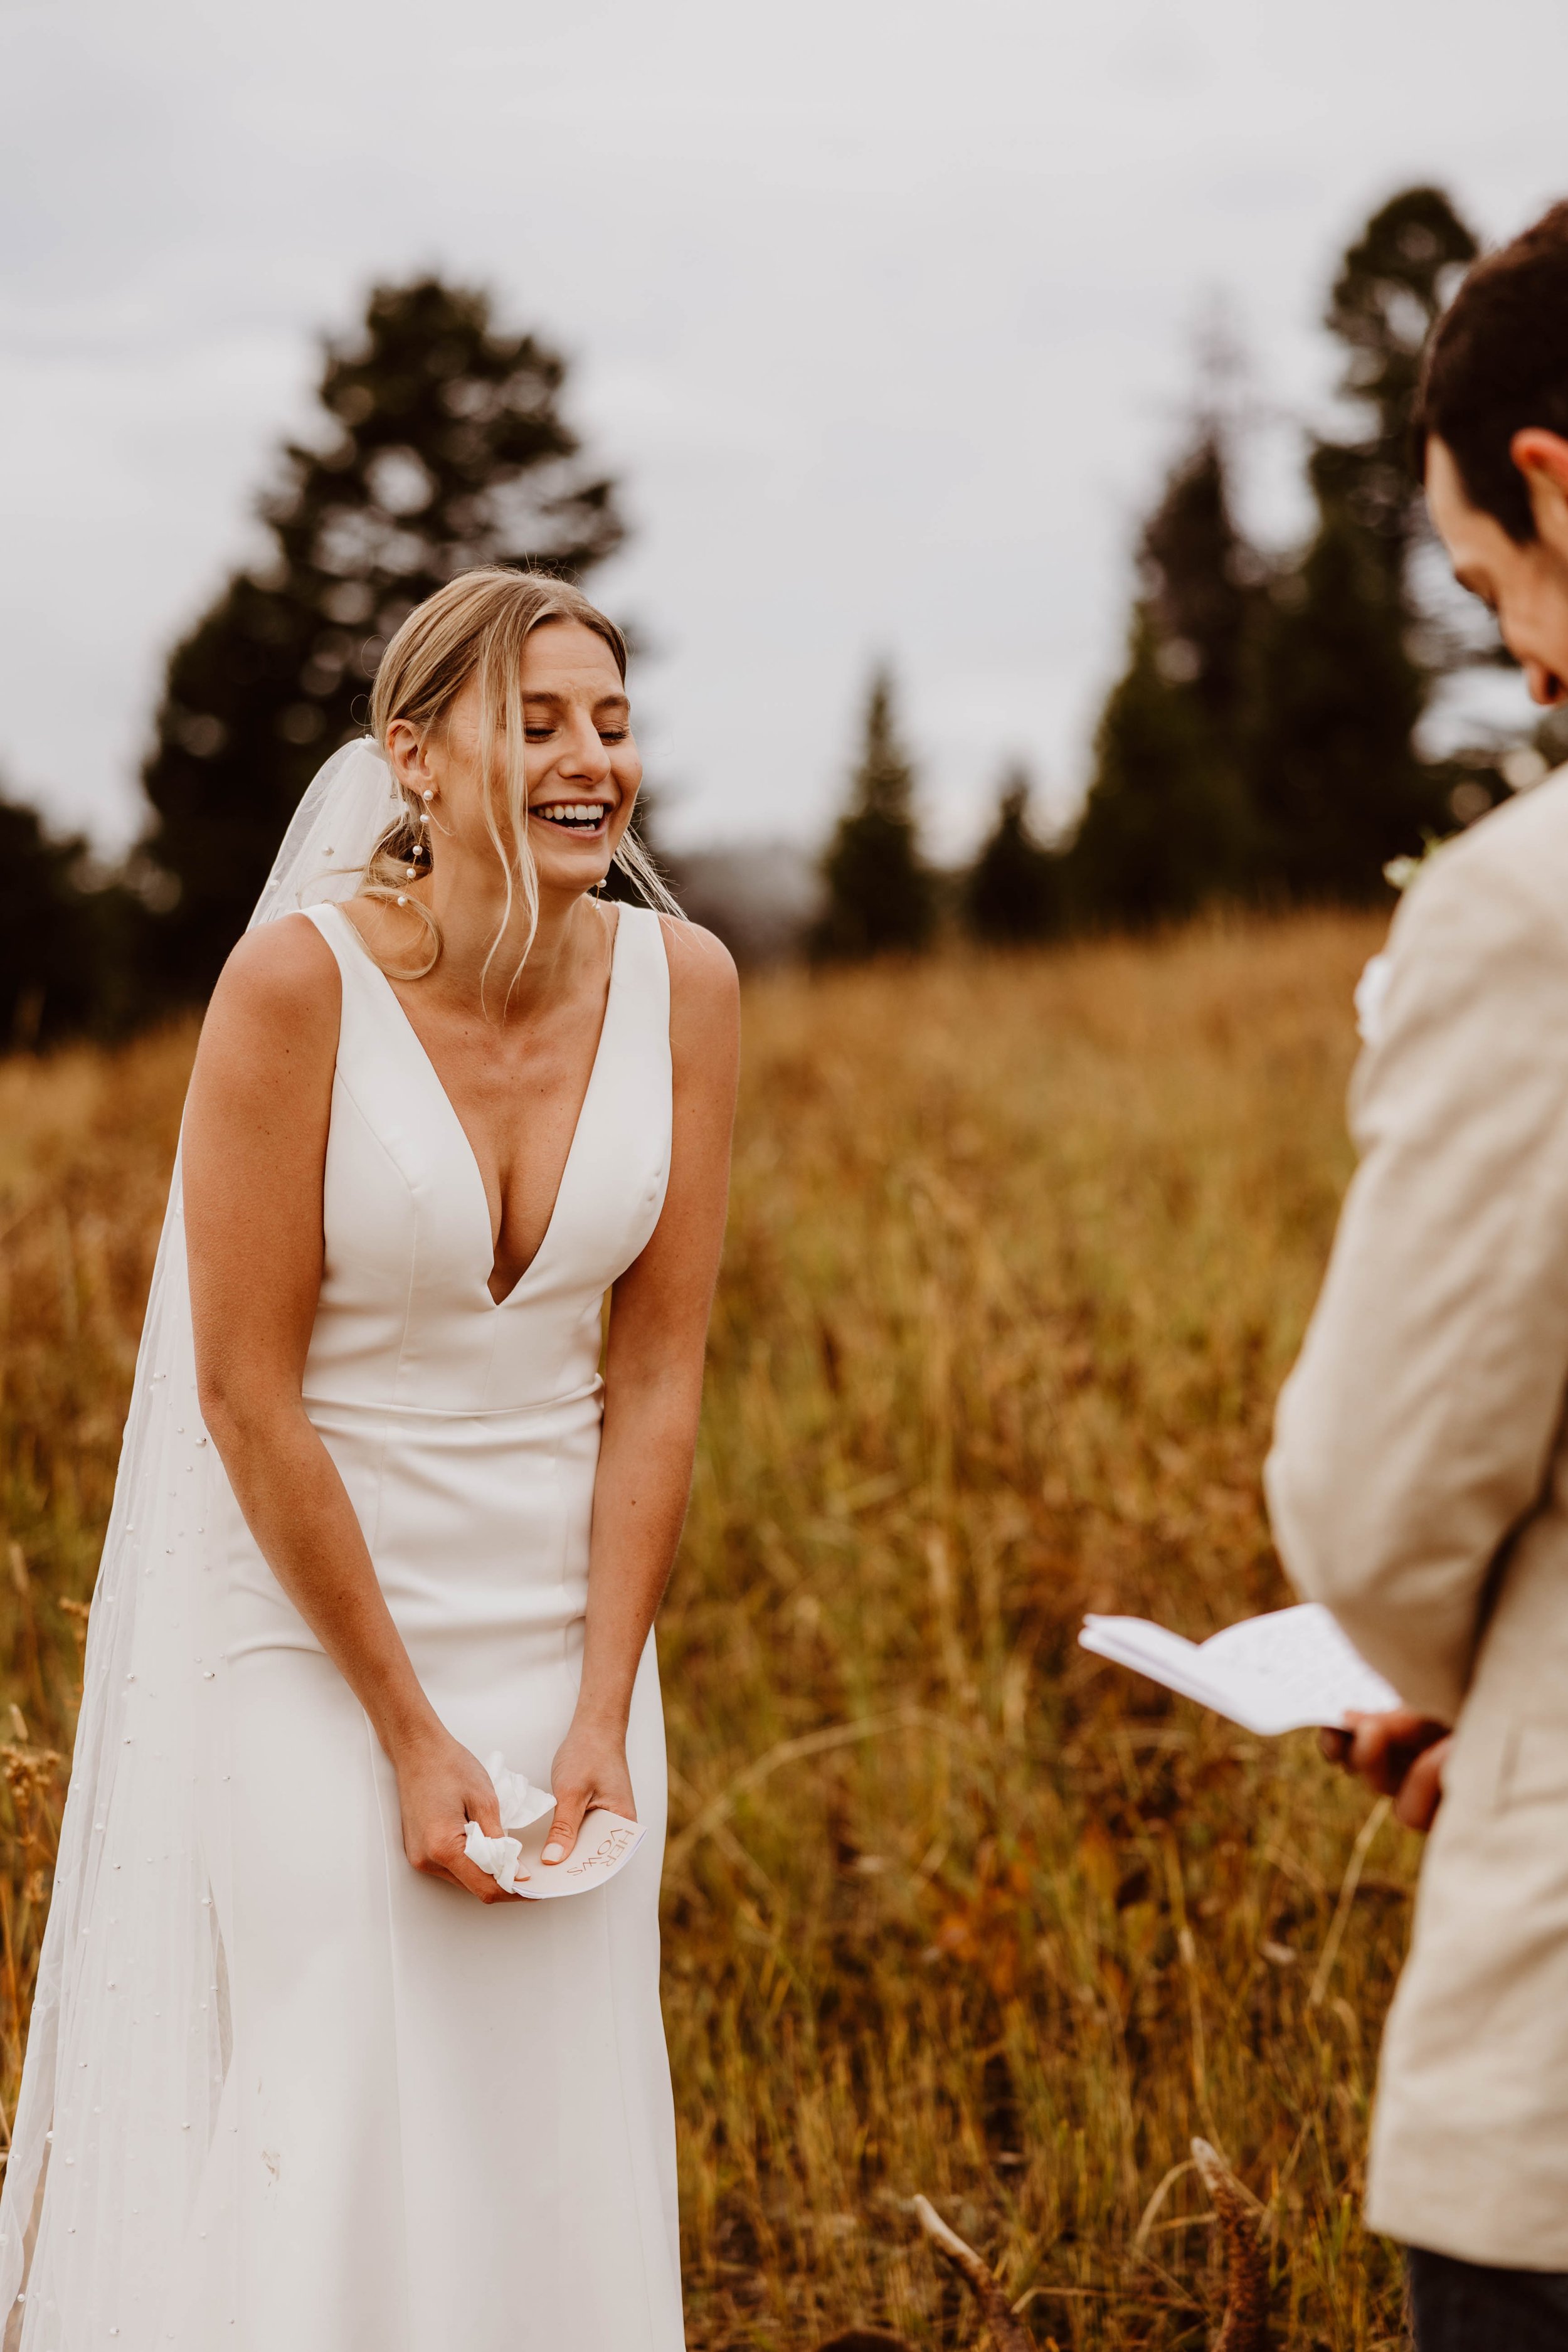 Tying the knot in Montana